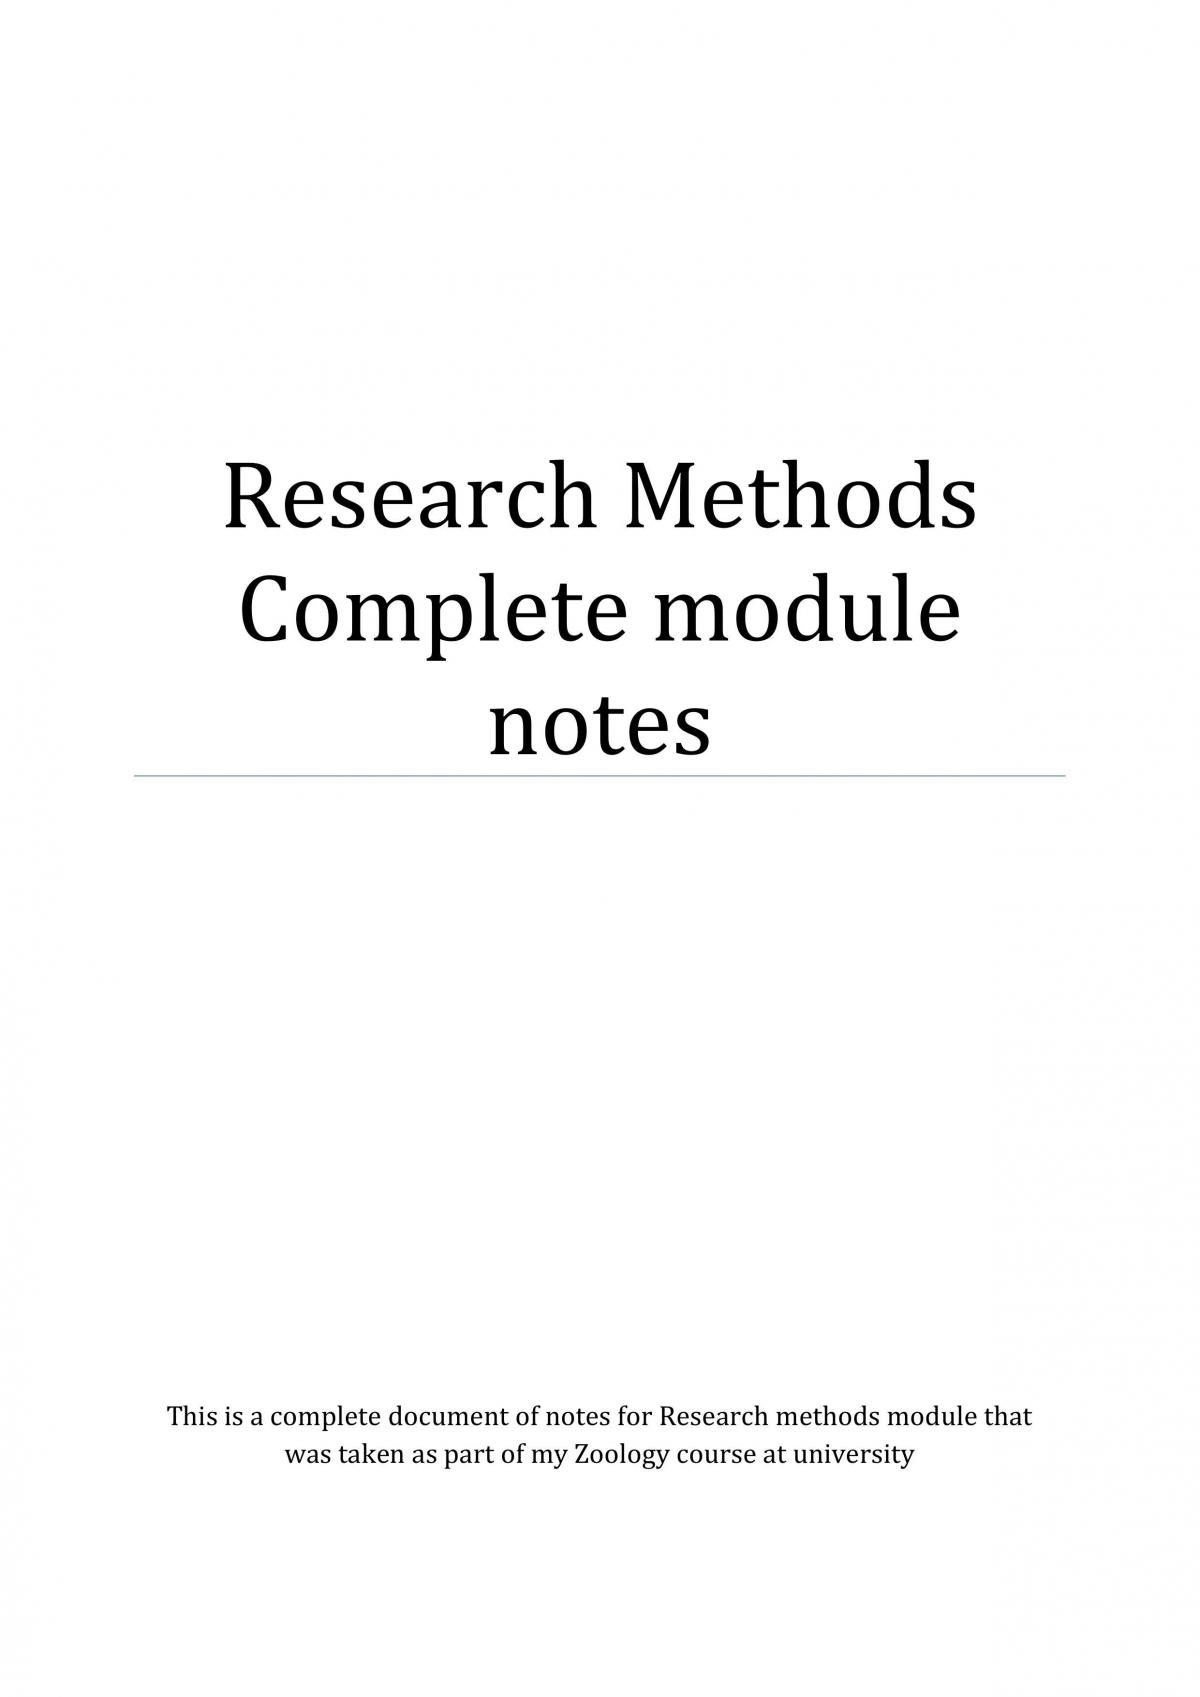 Complete study notes for Research methods - Page 1